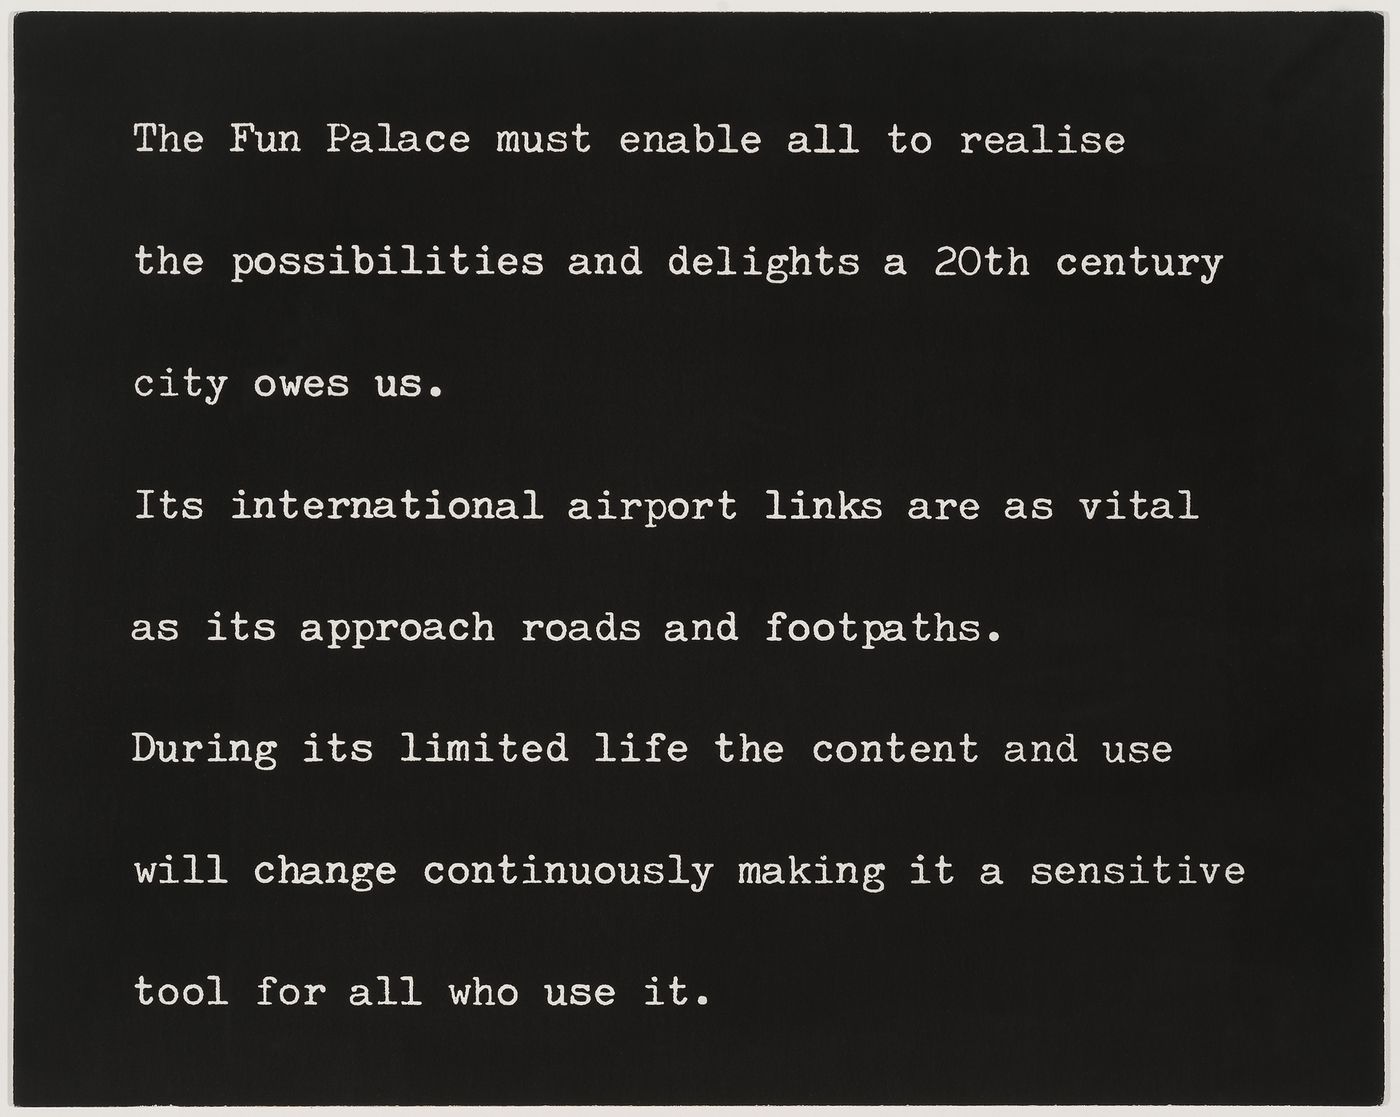 Architect's statement for the Fun Palace project (presentation panel)